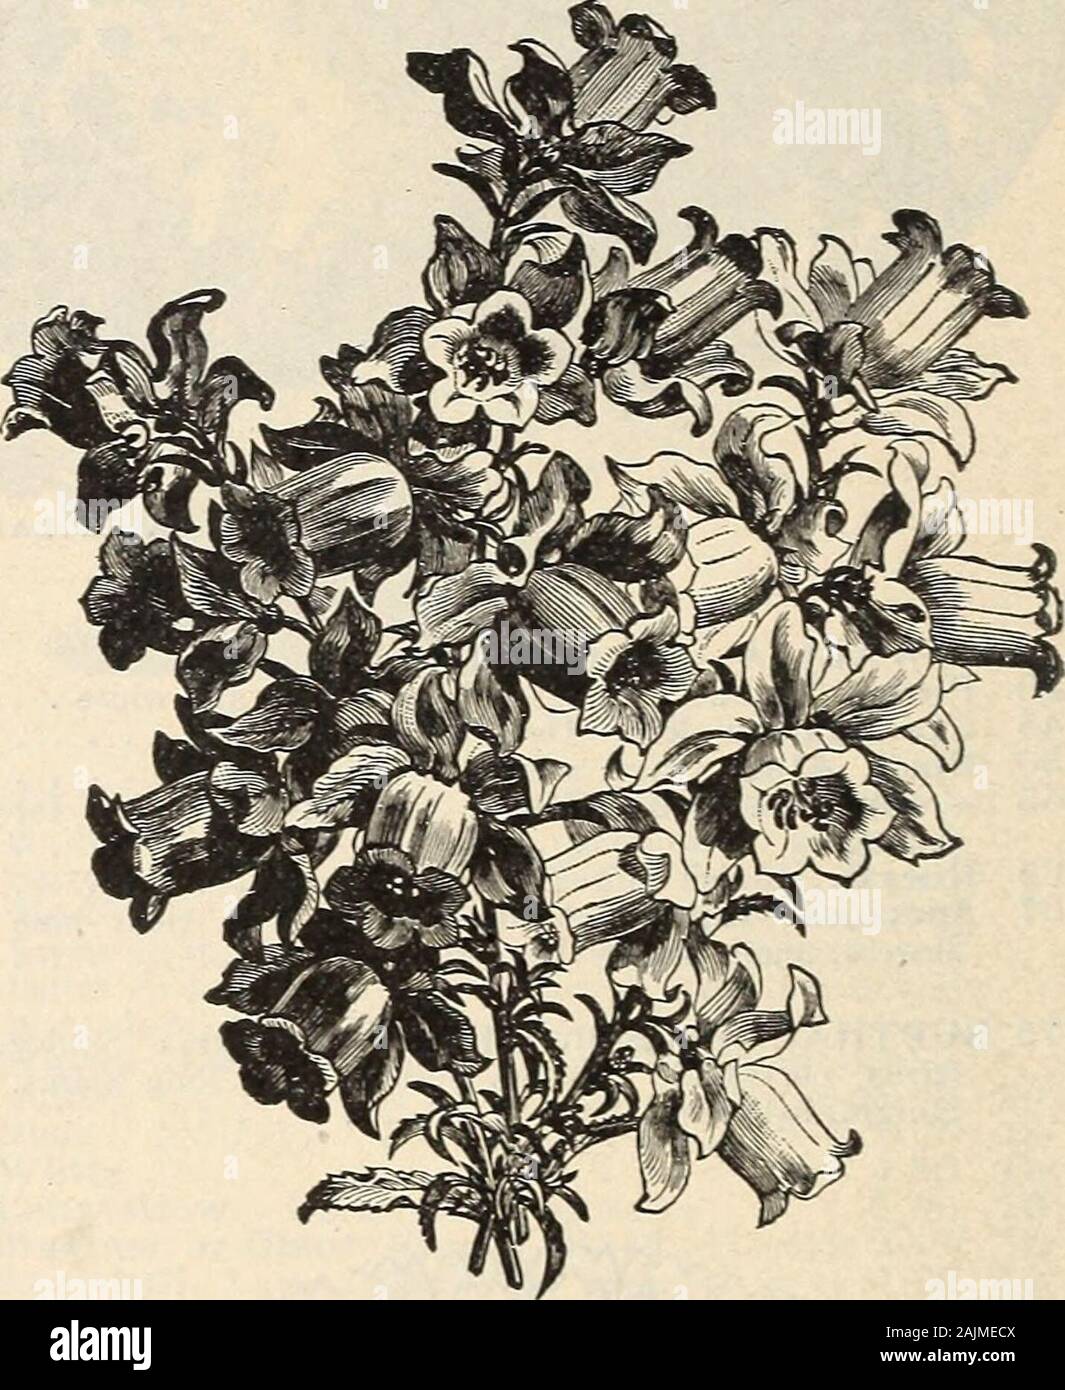 Farquhar's catalogue of seeds 1900 : plants, bulbs tools fertilizers, sundries . t; two feet in height; eachbranch tipped with numerous large, light blue flowers. .Nobilis. Hardy biennial; blue. Three feet — Alba. White ? Persicifolia. Splendid perennial; blue. Two feet . .05 — Alba. White 05 — Flore Pleno. Double blue 10 Alba. Double white . &lt; 10 — Grandiflora Alba. Very large, pure white flowers .20 Ccerulea. Large flowers, beautiful shade of blue .20 Pyramidalis. (The Chimney Campanula.)Stately, hardy perennial; very handsome as borderplants or grown in pots for conservatory decoration.H Stock Photo